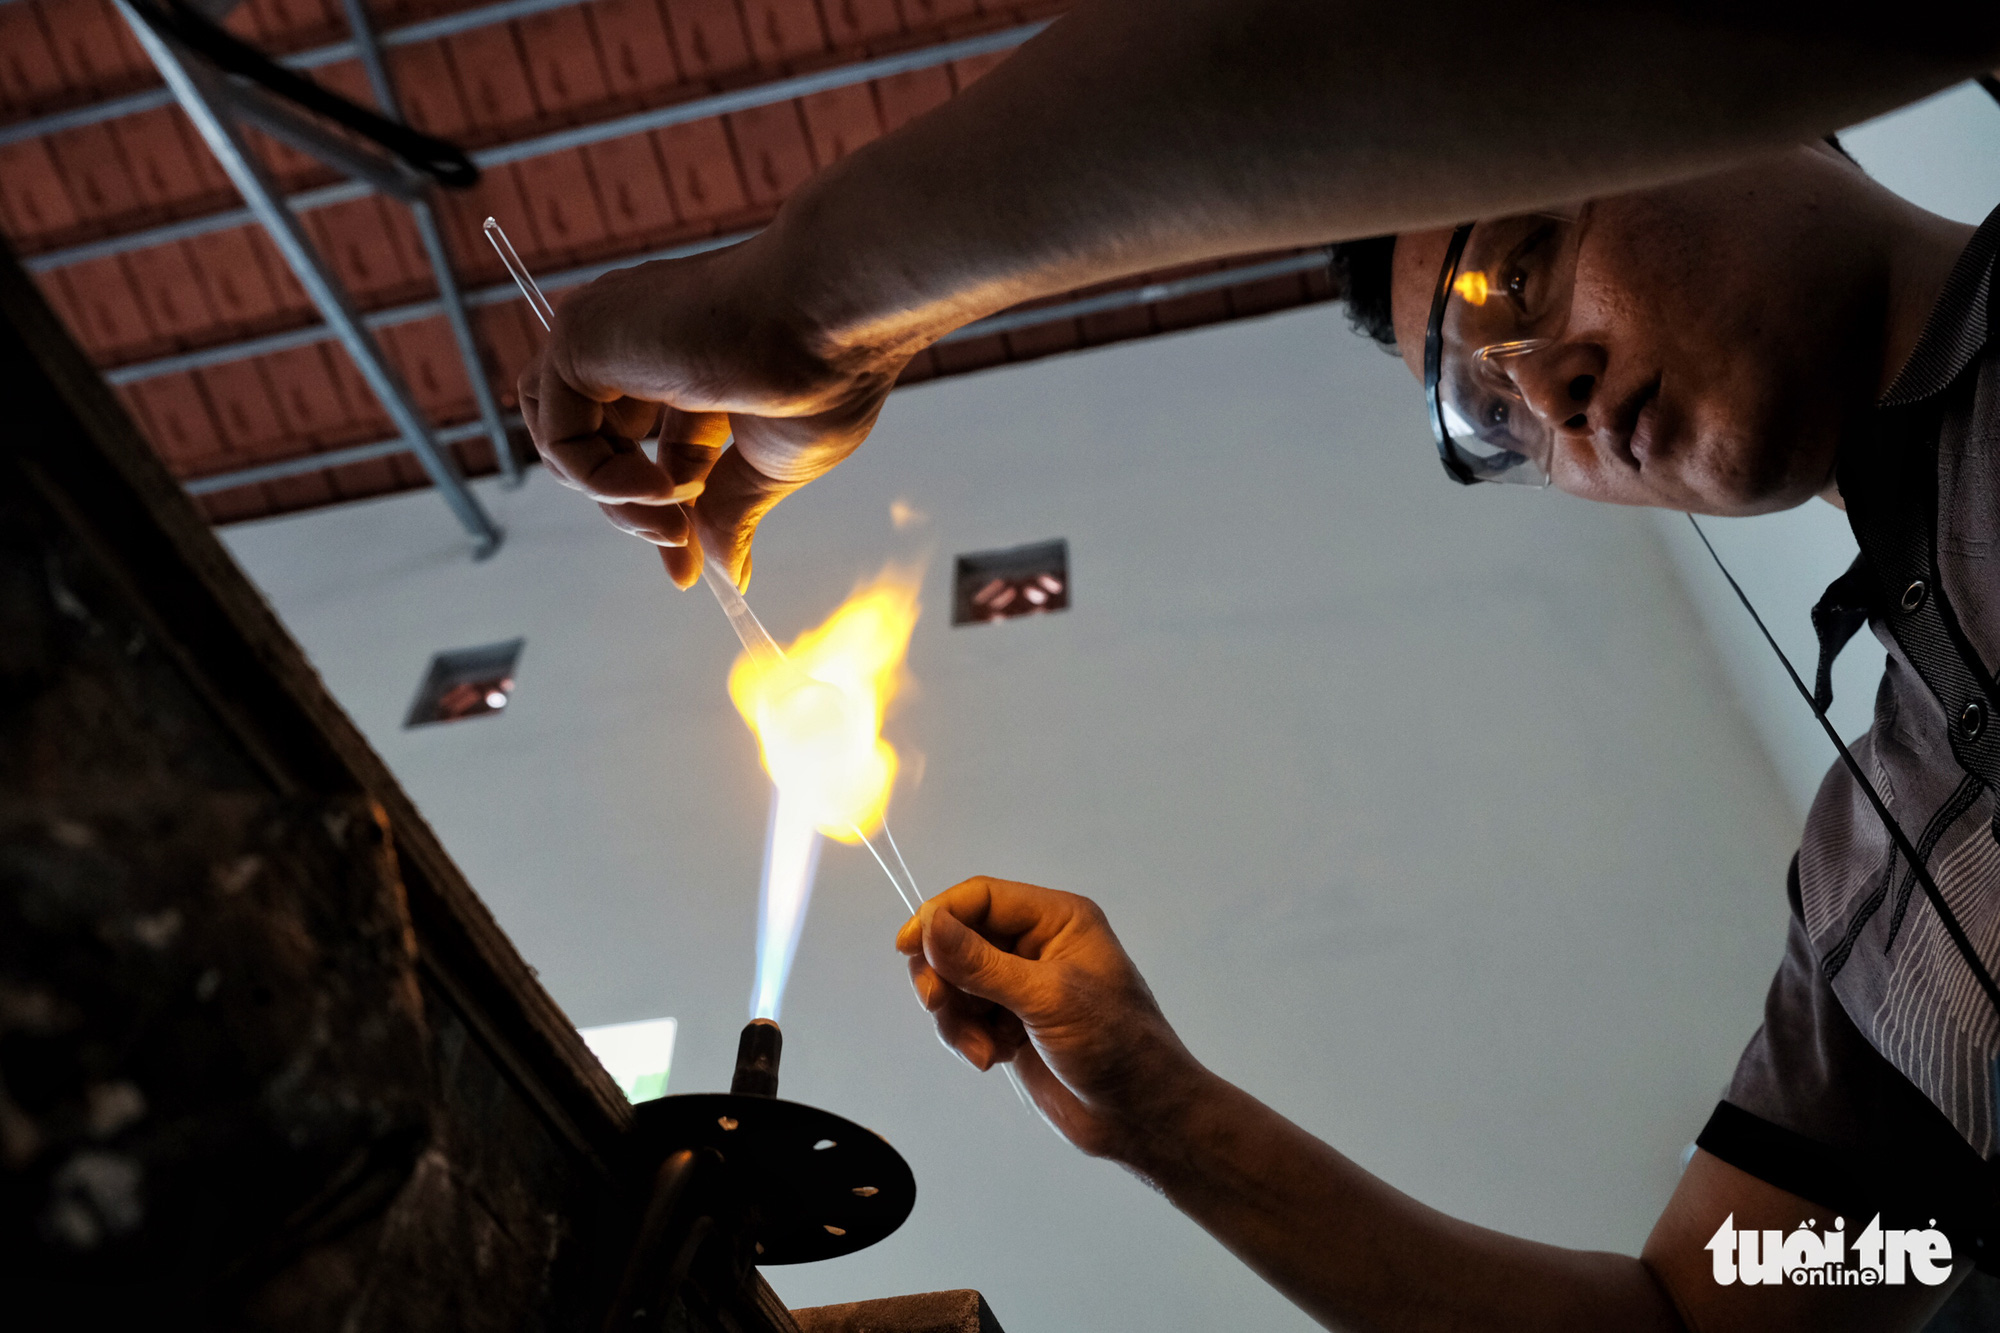 Hanoi’s skilled glass-blowers keeping the flame alive